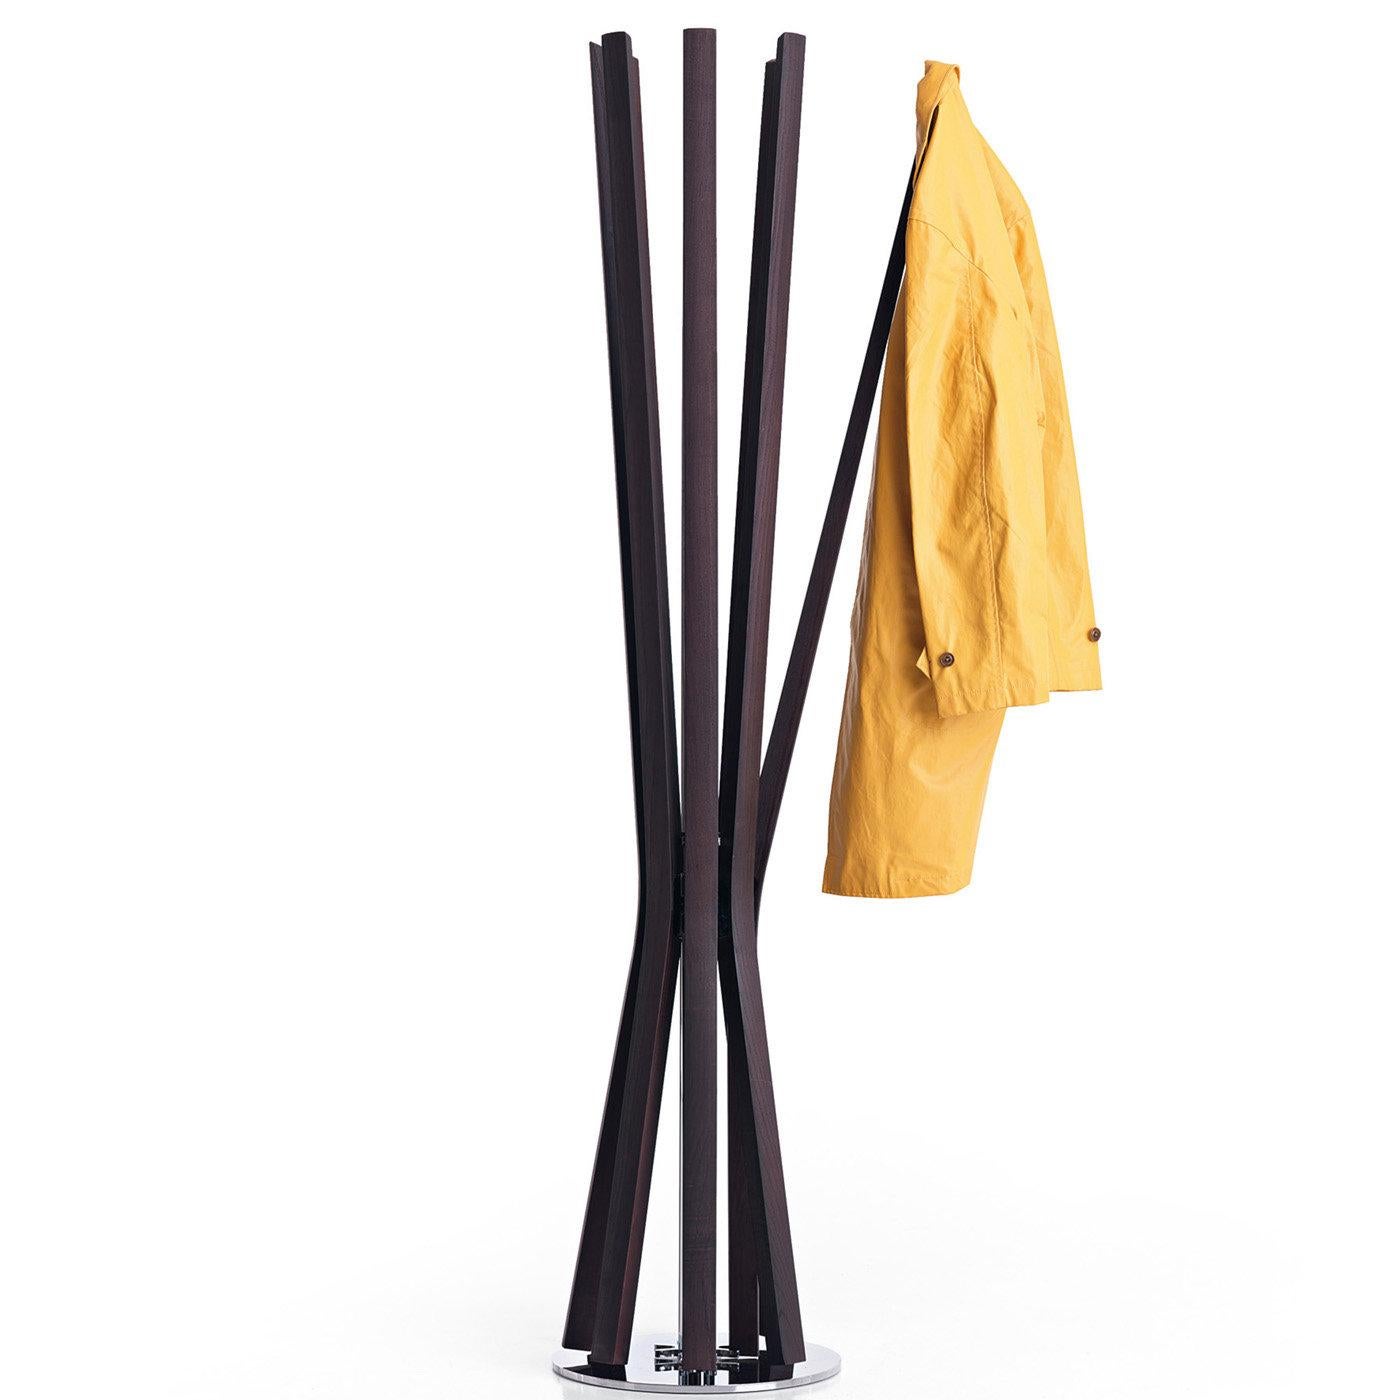 Conveying a strong visual appearance in a light and harmonious silhouette, this coat rack designed by Jeff Miller will be a stunning addition to a modern entryway or office. The simple yet elegant silhouette is extremely functional, with a